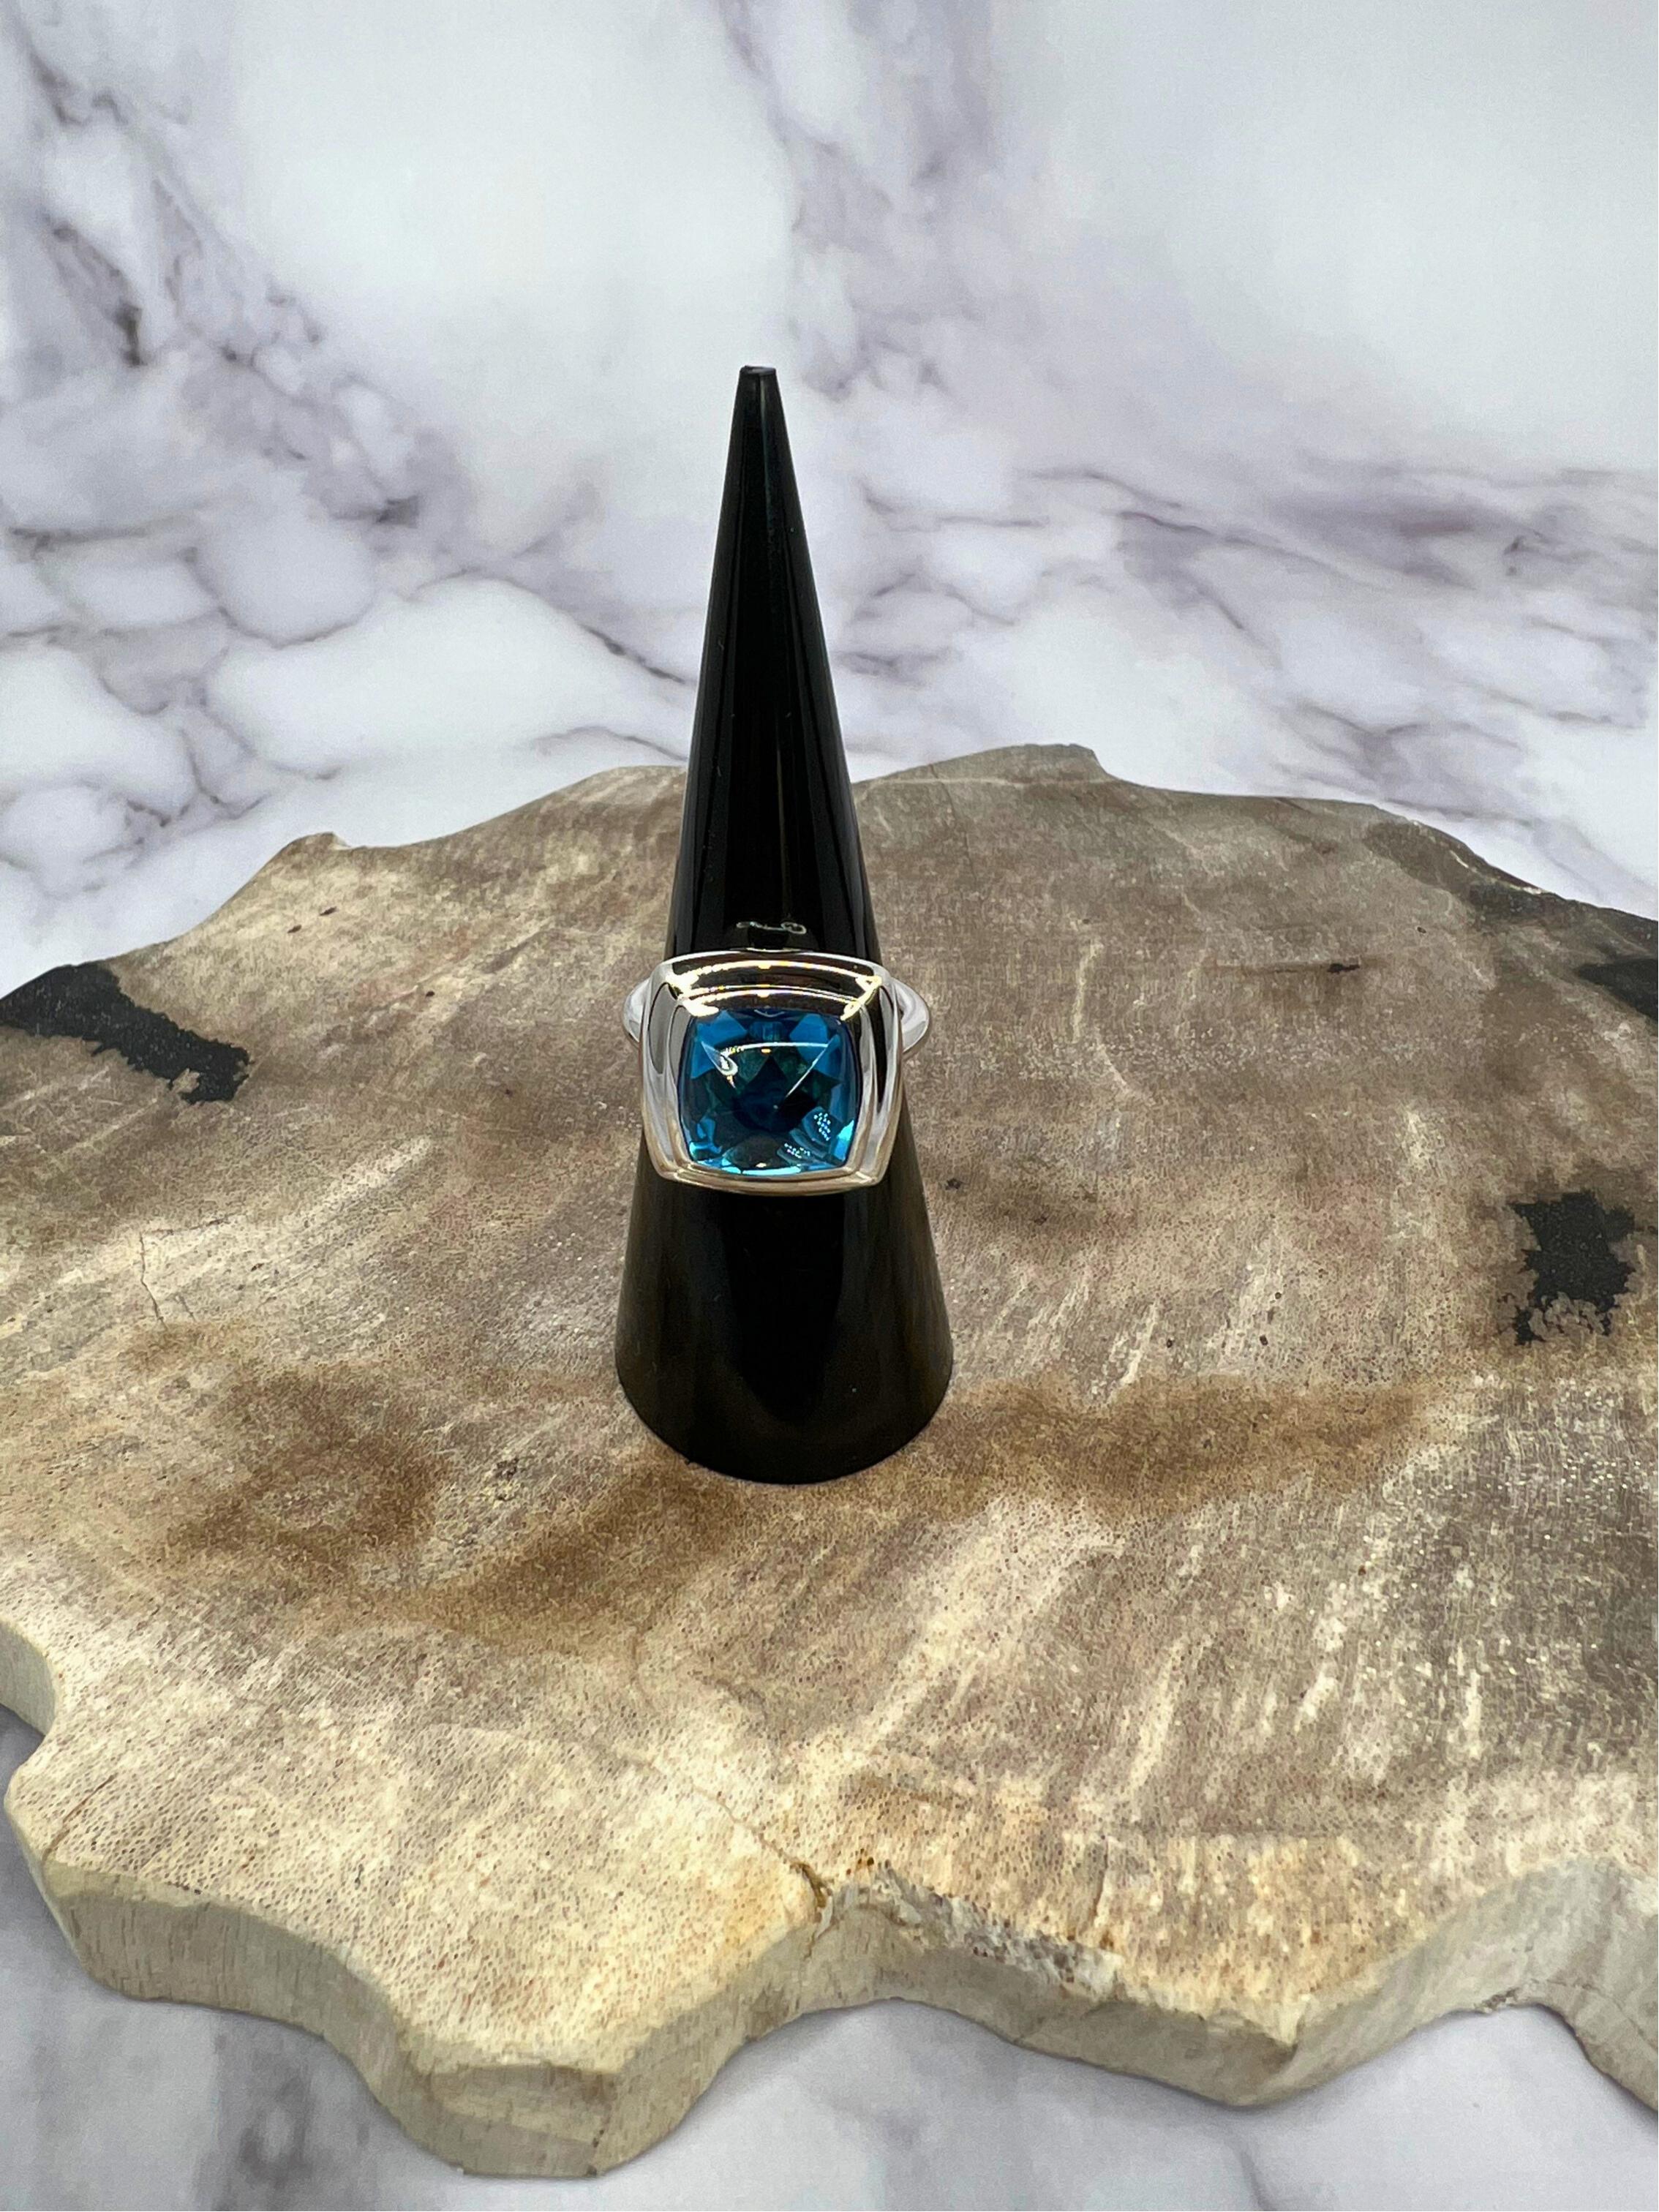 Blue Topaz Sugarloaf Cabochon Mountain Pyramid Cone Cocktail 18K White Gold Ring For Sale 11